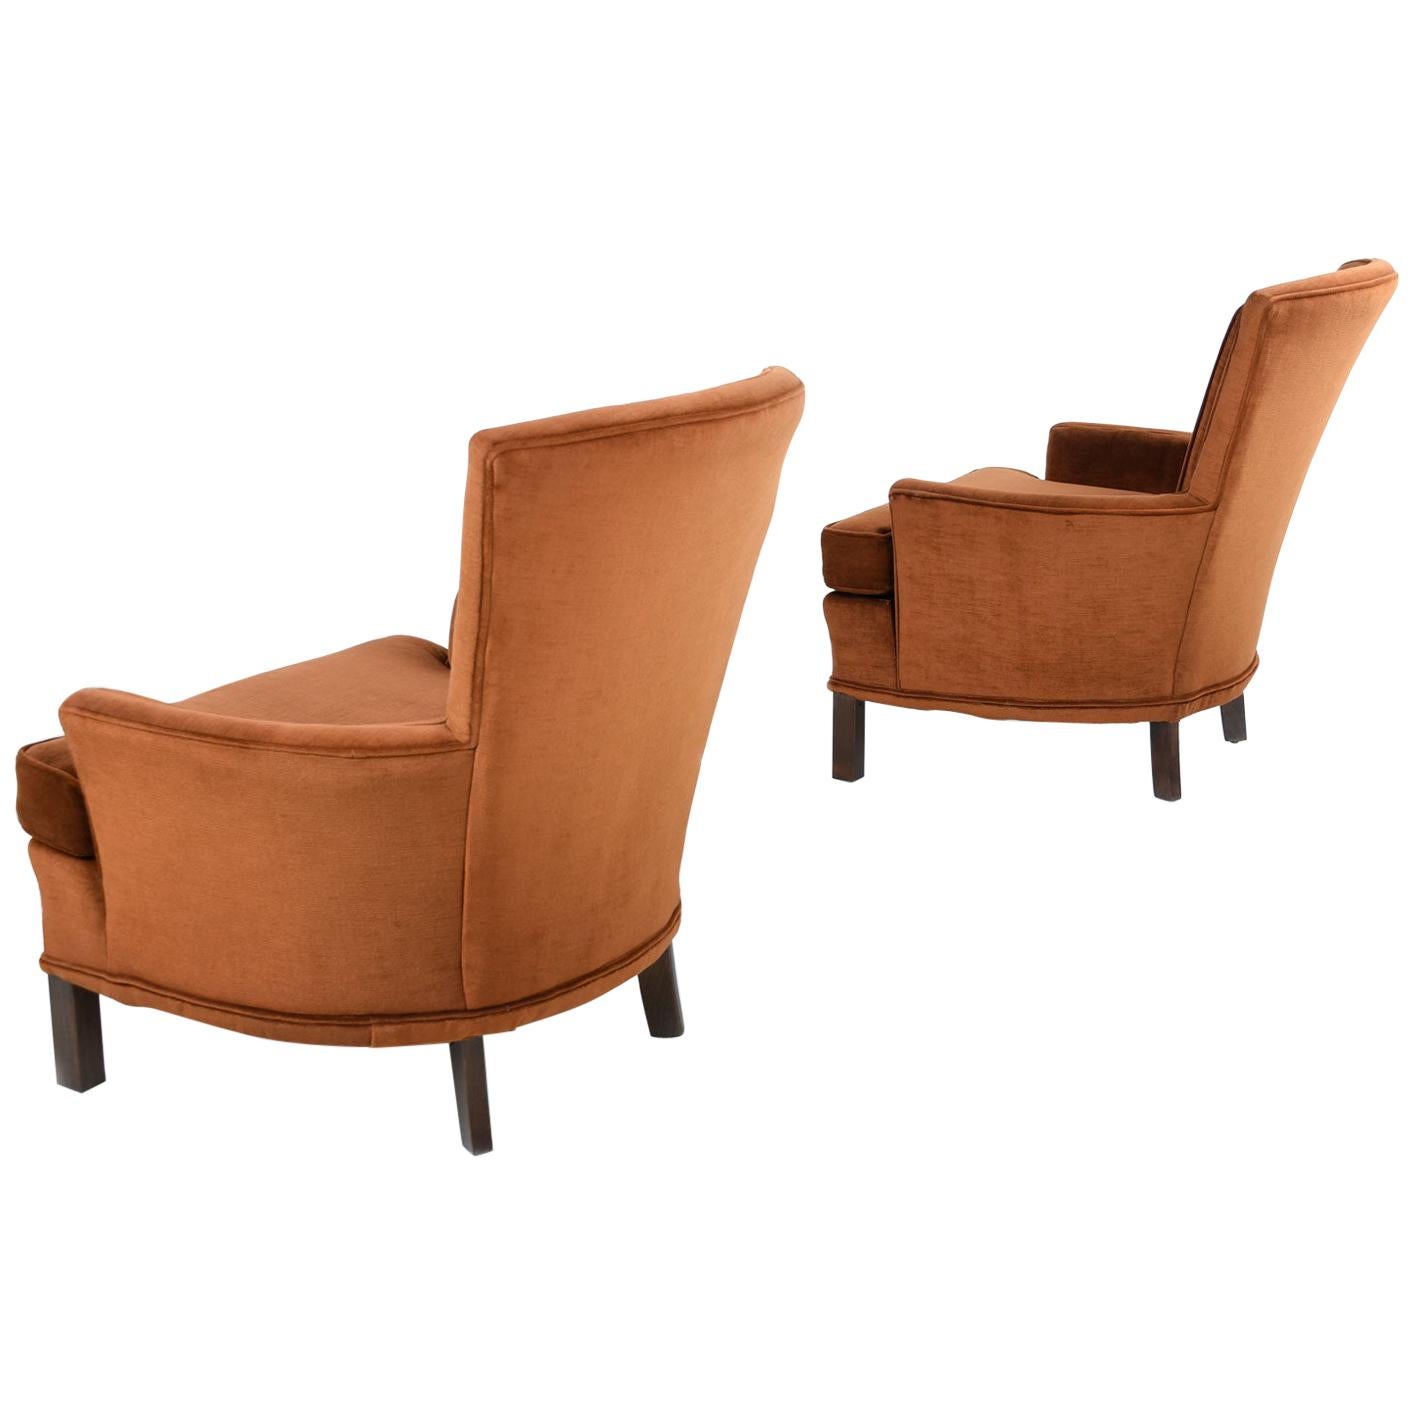 This charming pair of vintage armchairs come outfitted in their original rich velour upholstery. The nutty, copper toned, brown fabric is plush and inviting. A whimsical quilted medallion embellishes the backrest of these ever-so-quaint lounge